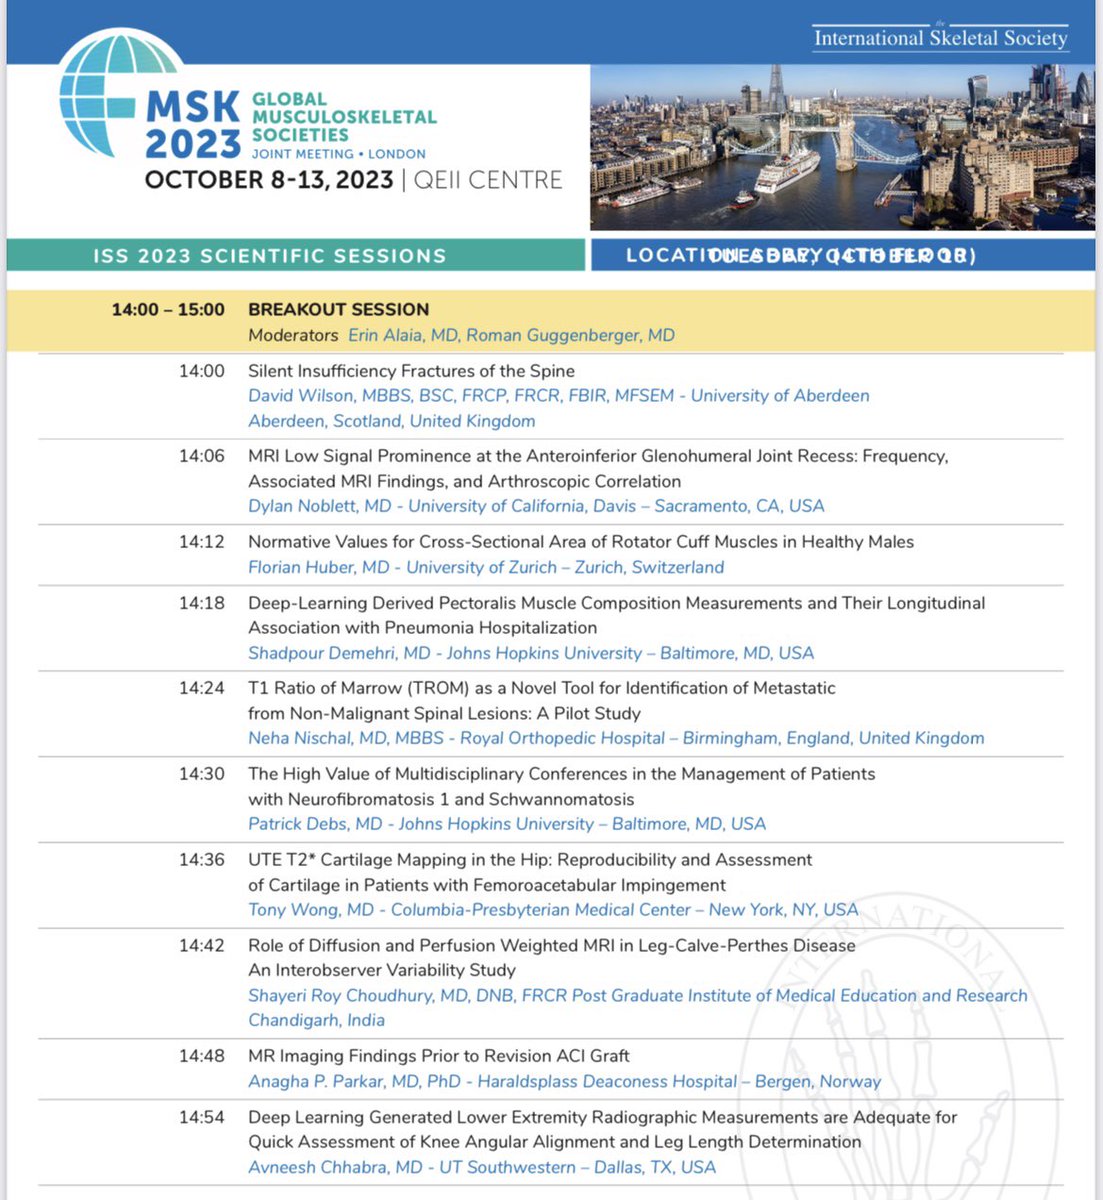 Excited to share the lineup for the Scientific Session Oct 9-10 during the MSK2023 Global MSK Societies Joint Meeting hosted by the International Skeletal Society @intskeletal - A first-of-its-kind meeting including  ALL musculoskeletal societies worldwide
internationalskeletalsociety.com/msk-2023-globa…